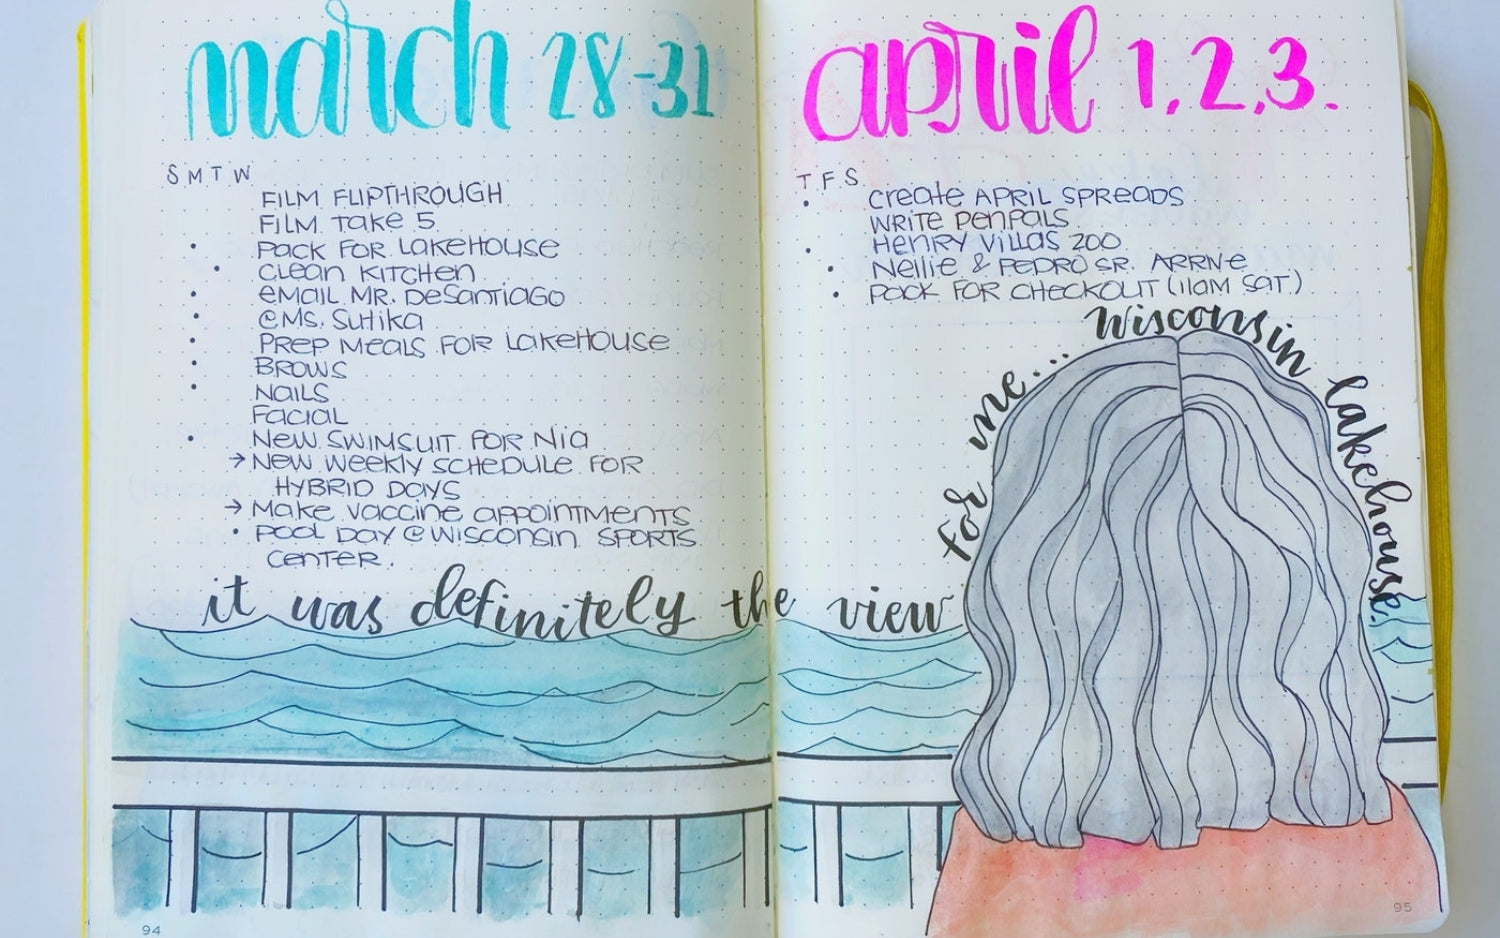 Track Your Reading Journey with These Creative Bullet Journal Book Trackers